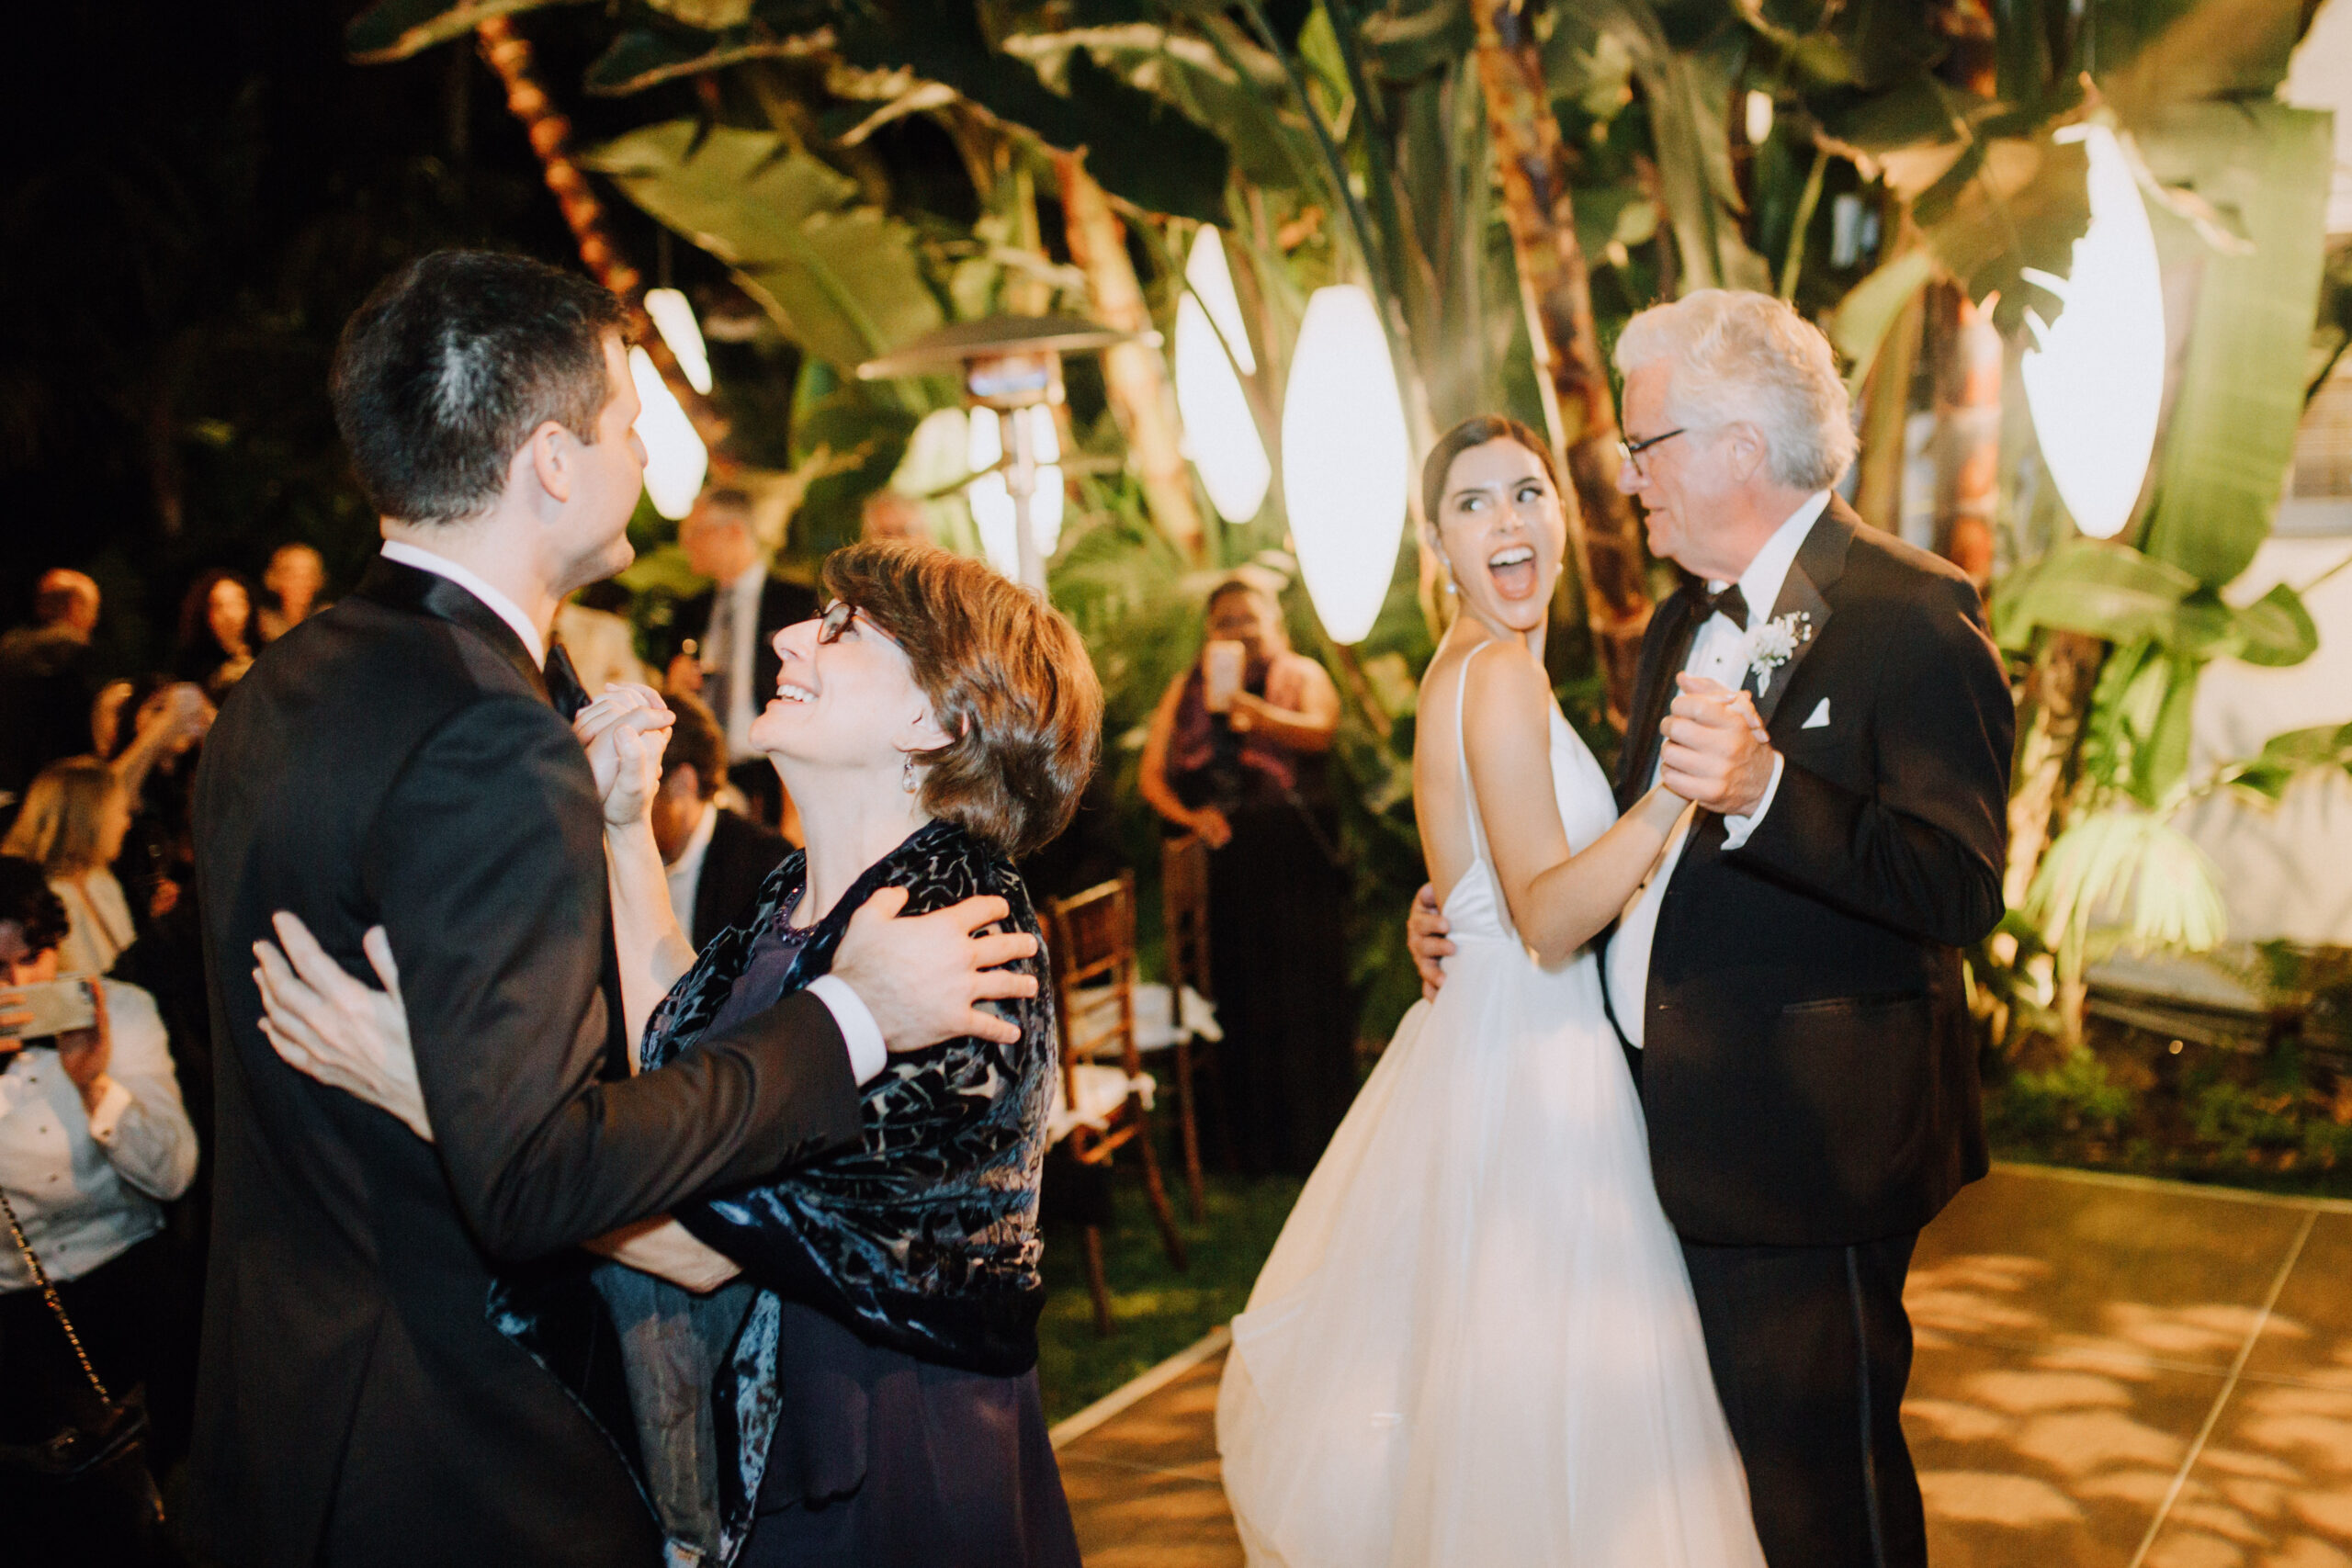 bride shares a dance with her dad as her new husband share a dance with his mom